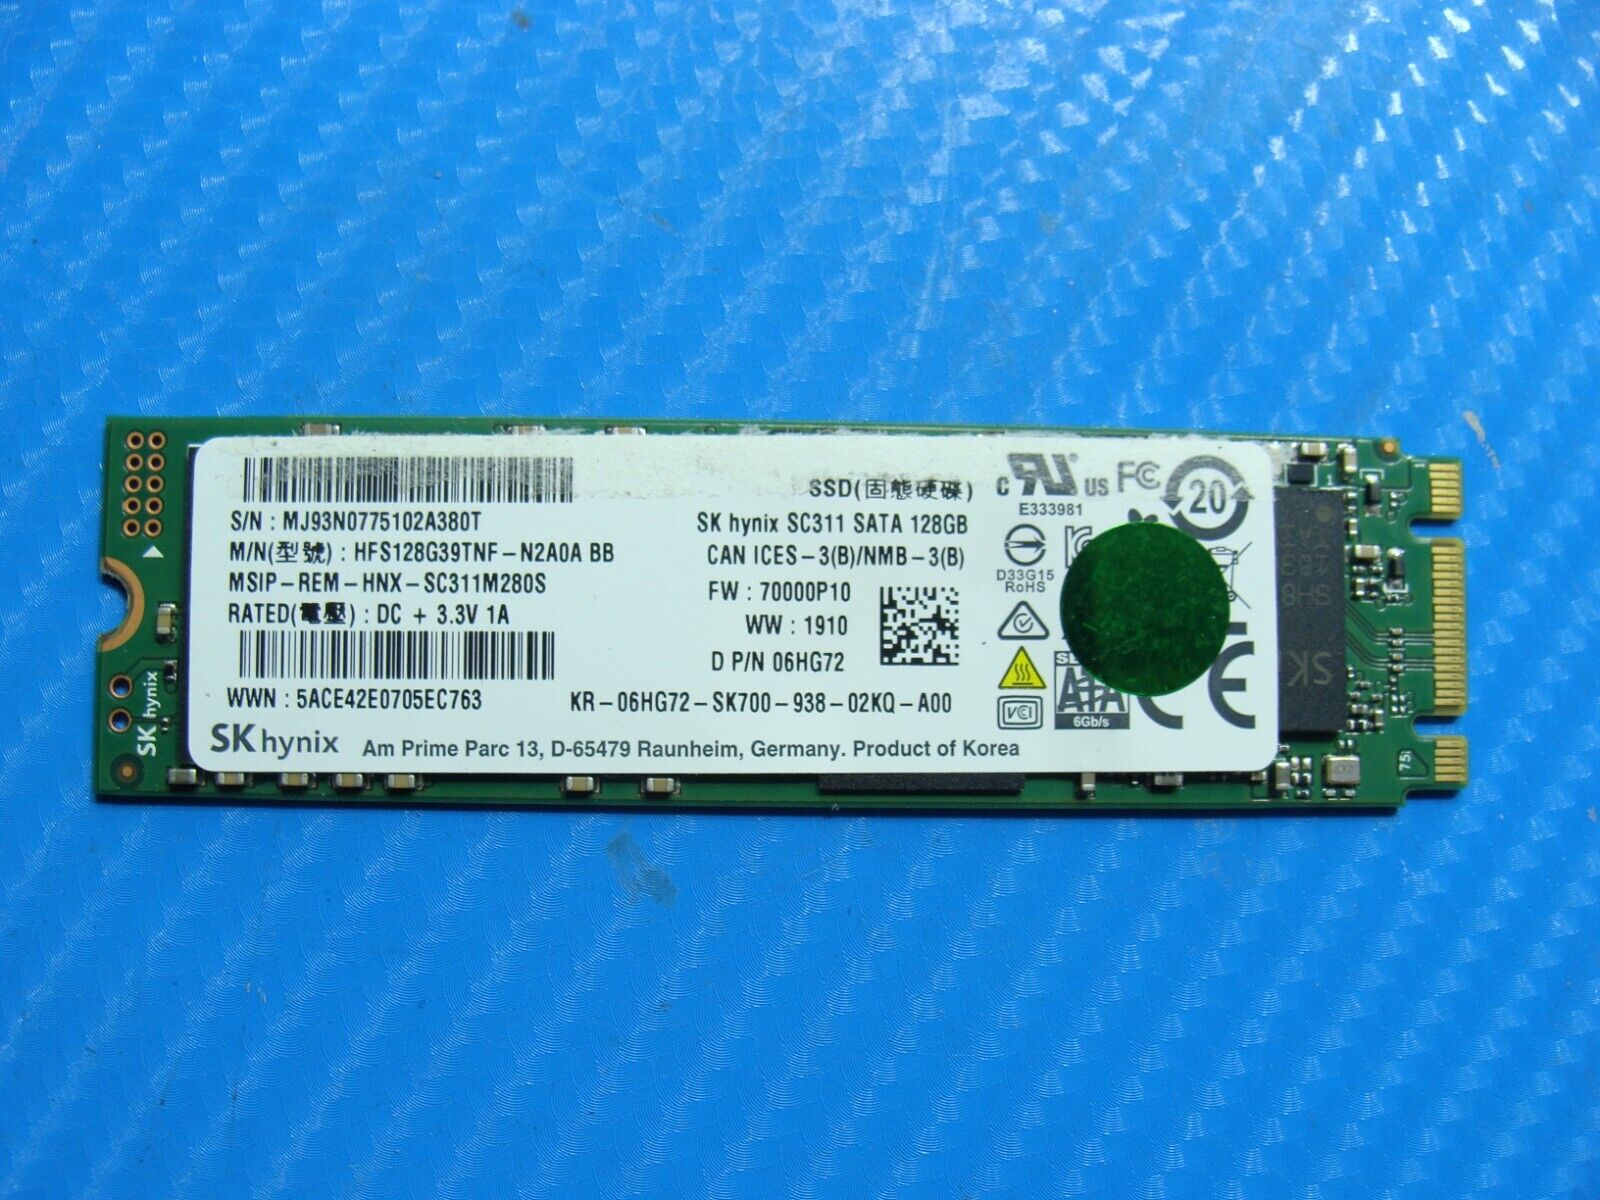 Dell 5491 SK Hynix 128GB M.2 SATA SSD Solid State Drive 6HG72 HFS128G39TNF-N2A0A